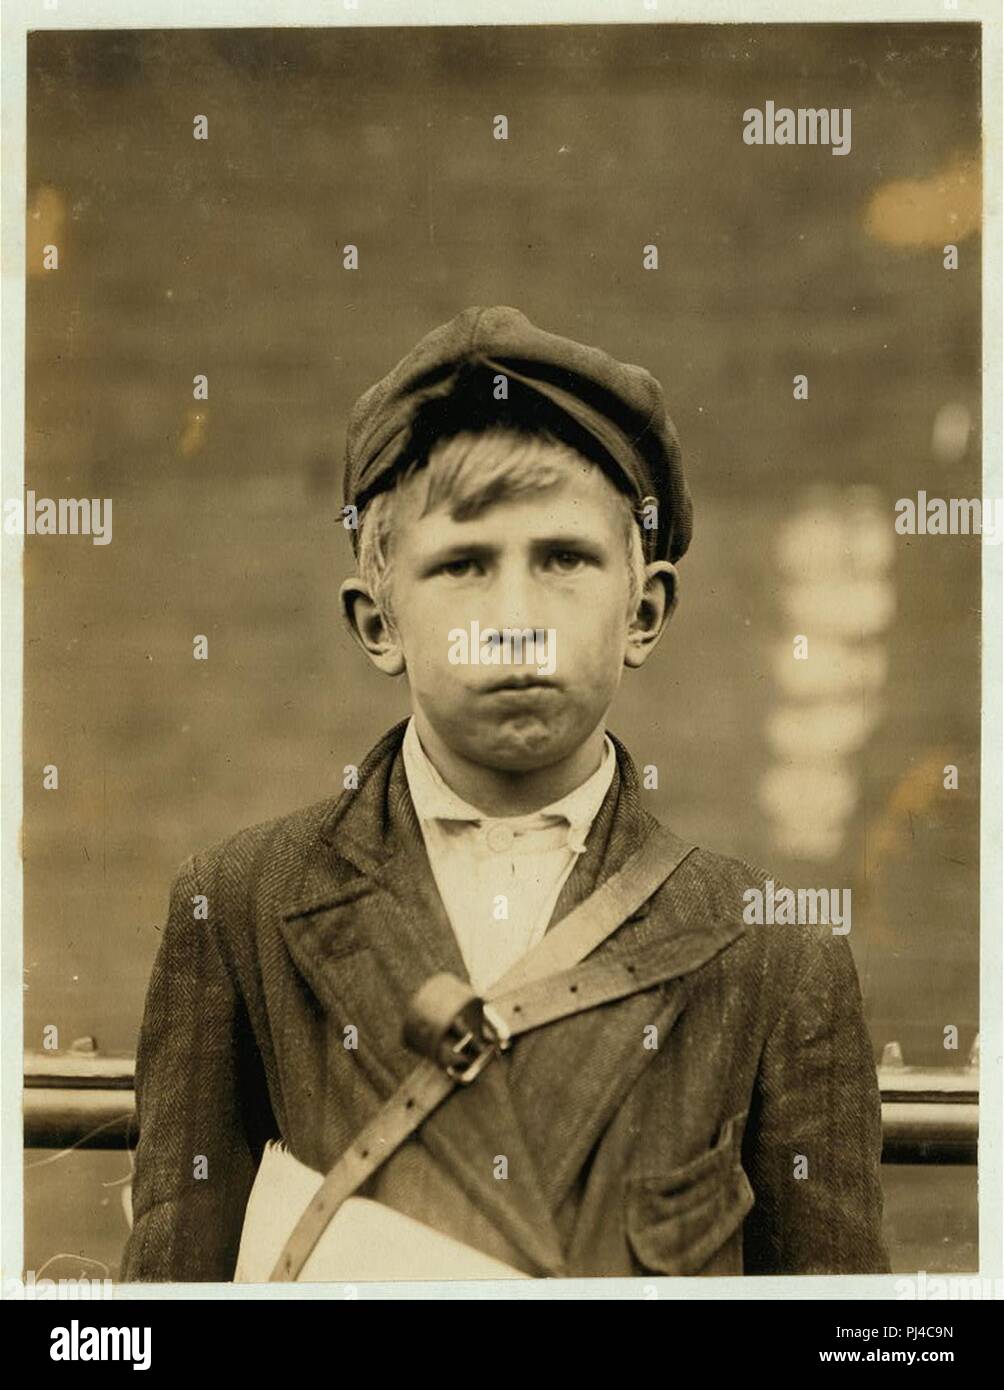 Barney Goldstein, 83 W. 5th St. Newsboy, 10 years of age. Selling newspapers 1 year. Average earnings 50 cents per week. Selling papers own choice. Don't smoke. Visits saloons. Works 5 hours Stock Photo